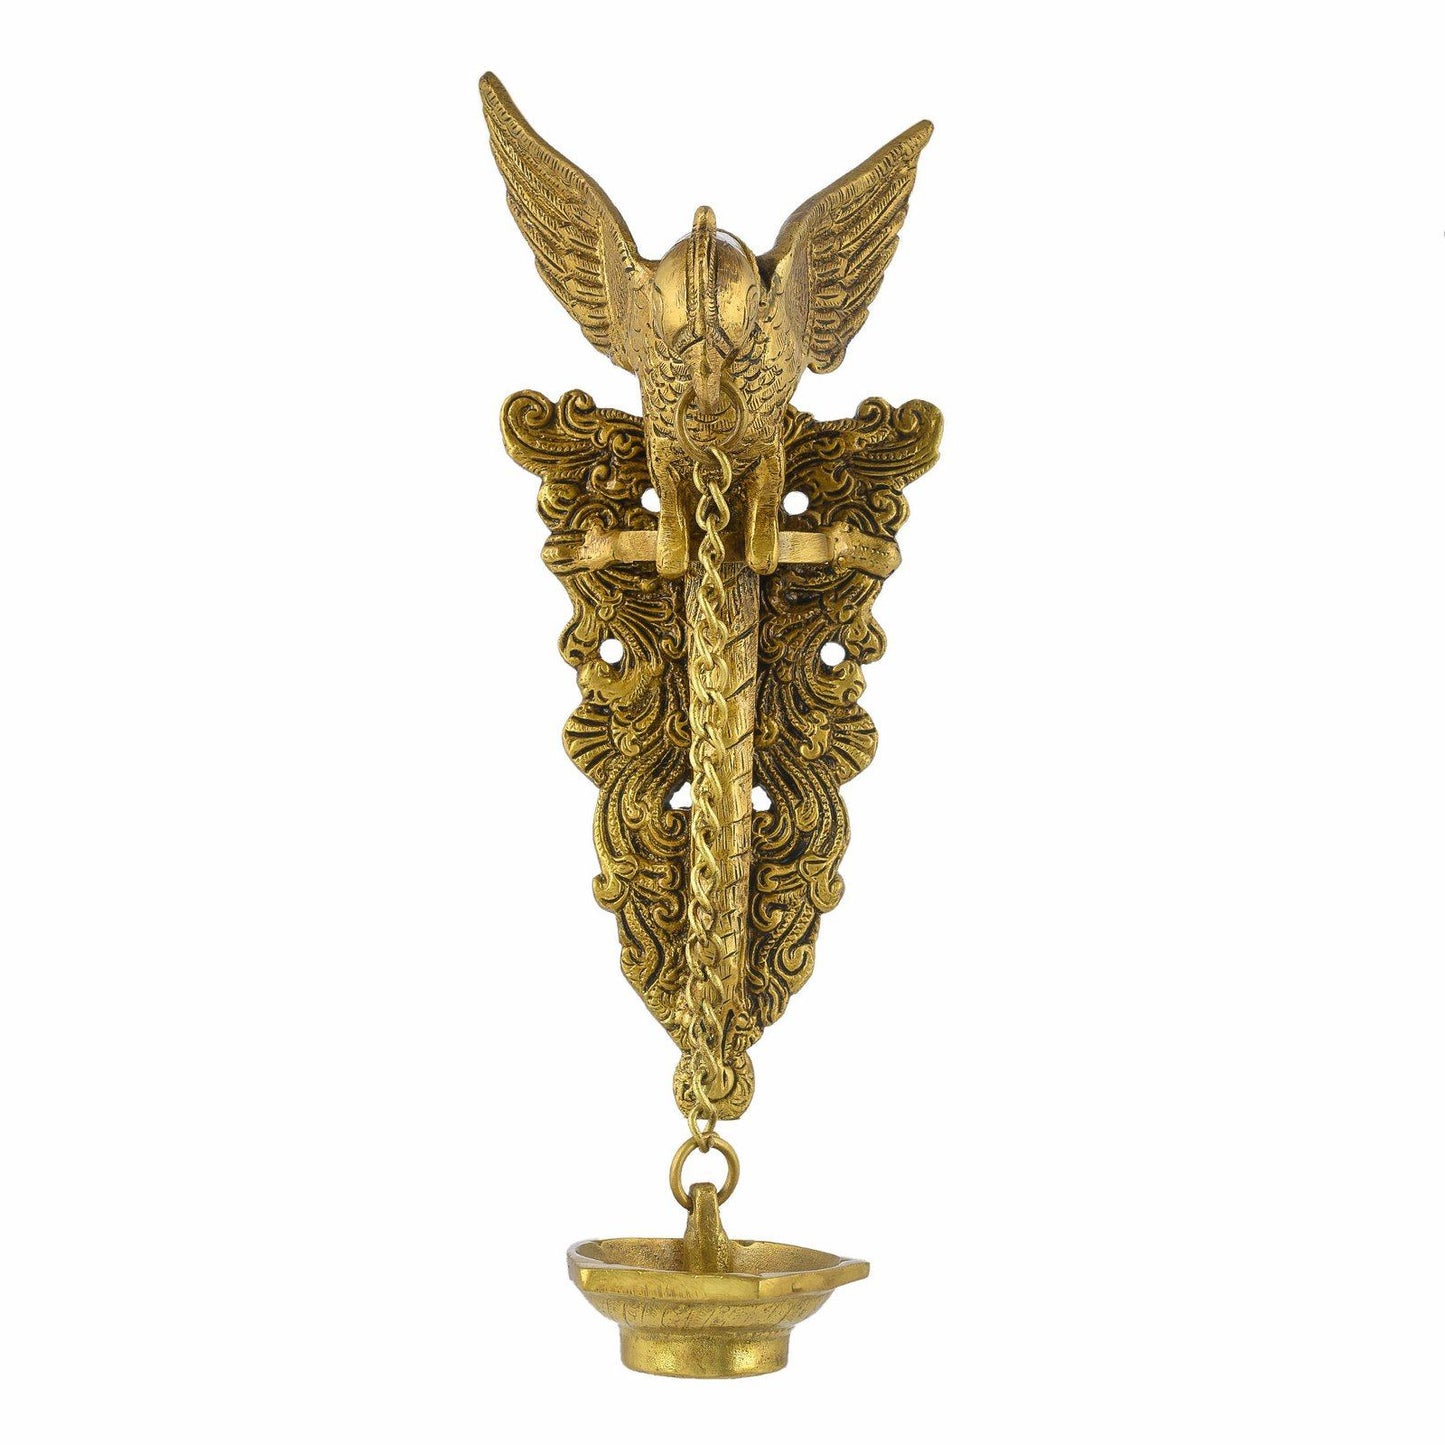 Buy Hanging Diya For Pooja Room, Antique Hanging Wall Mounted oil Lamp With Vintage Brass Bird Wall Art